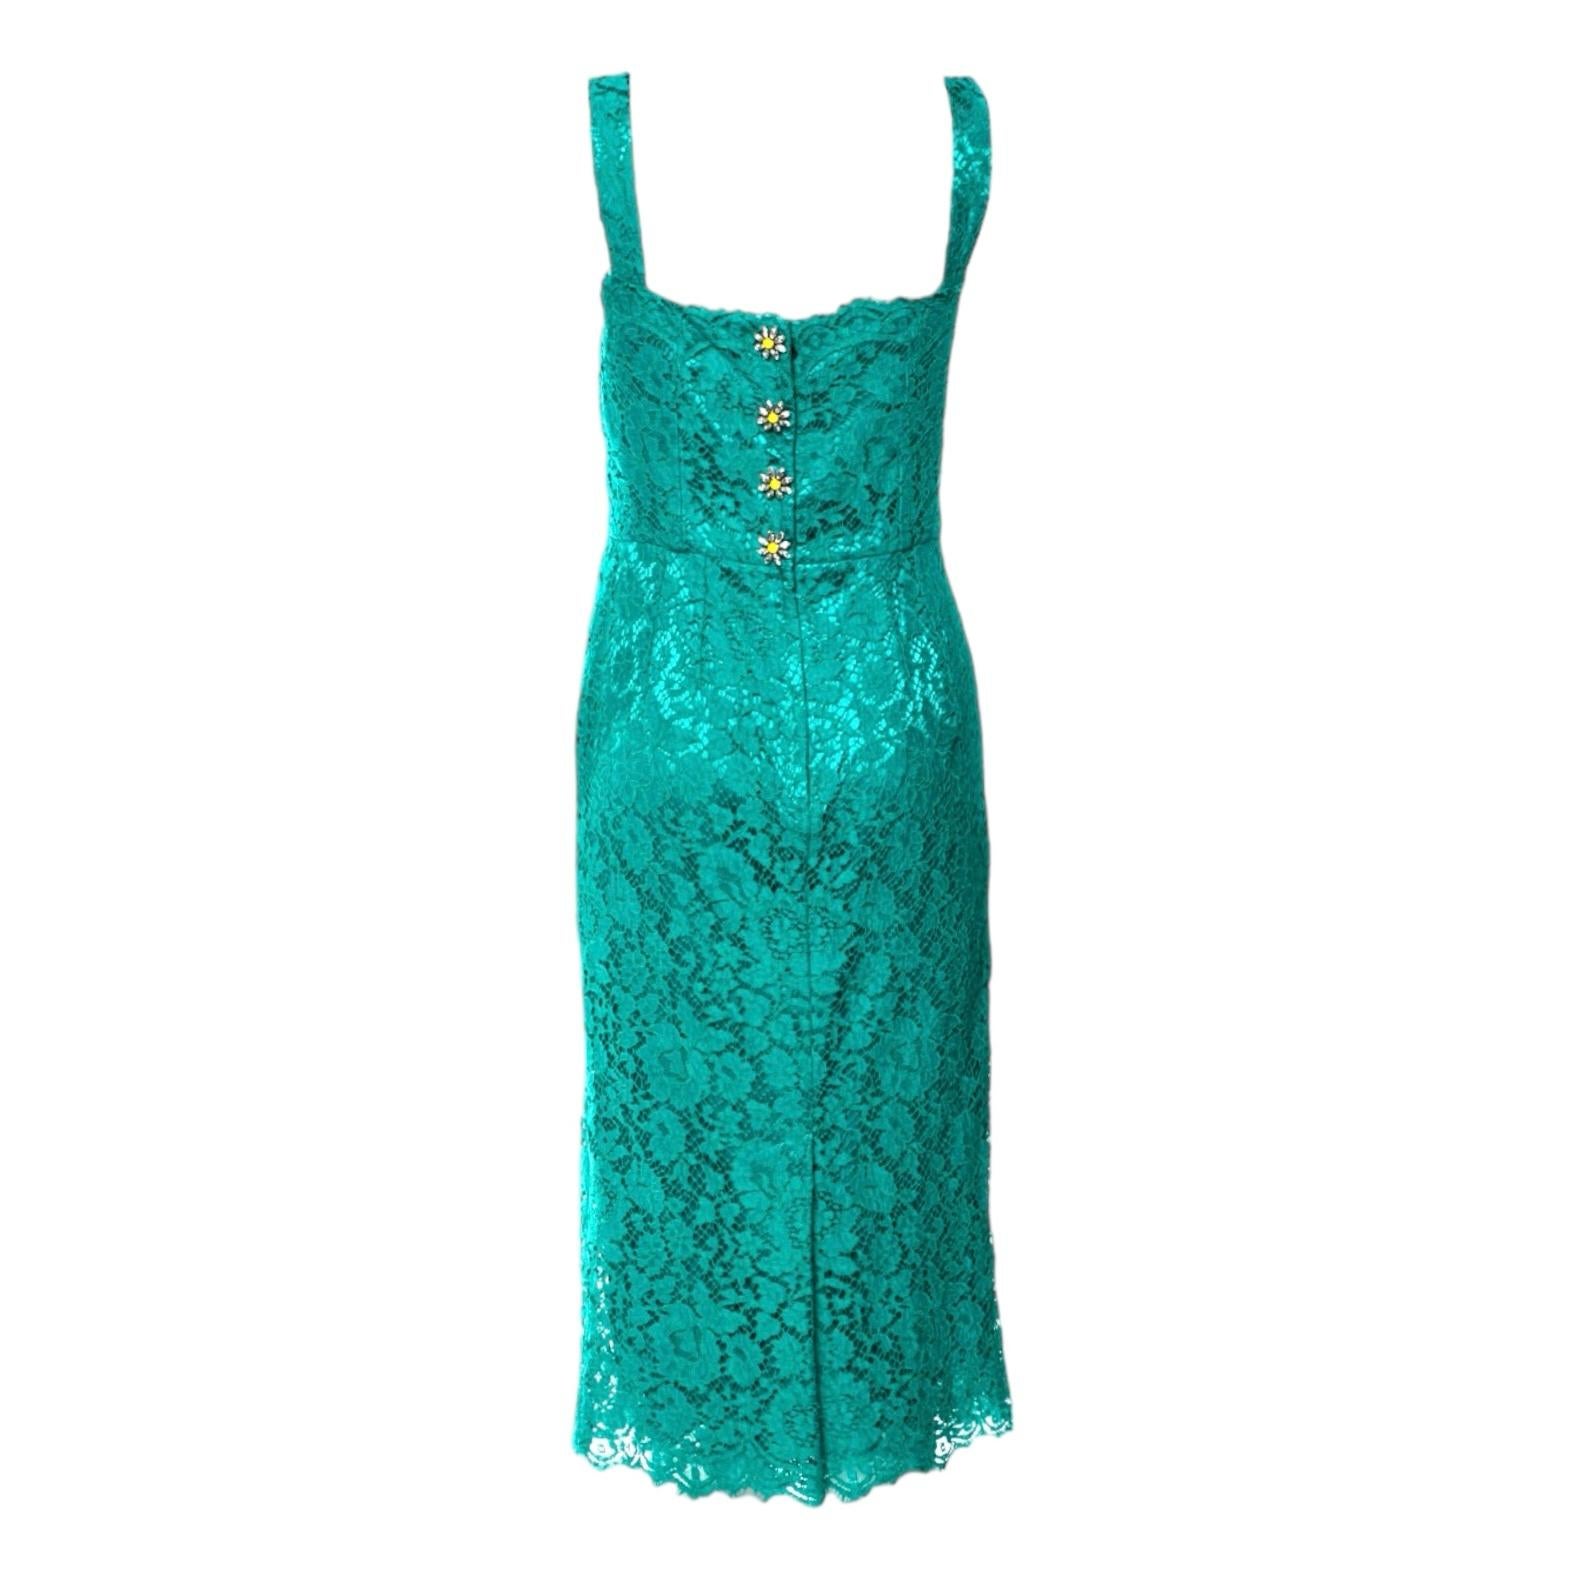 Beautifully cut from finest lace fabric, Dolce & Gabbana hit a retro-inspired note with this stunning shift dress
A DOLCE & GABBANA piece that will last you for years
Square neckline
Wide shoulder straps
4 Stunning crystal-encrusted floral buttons